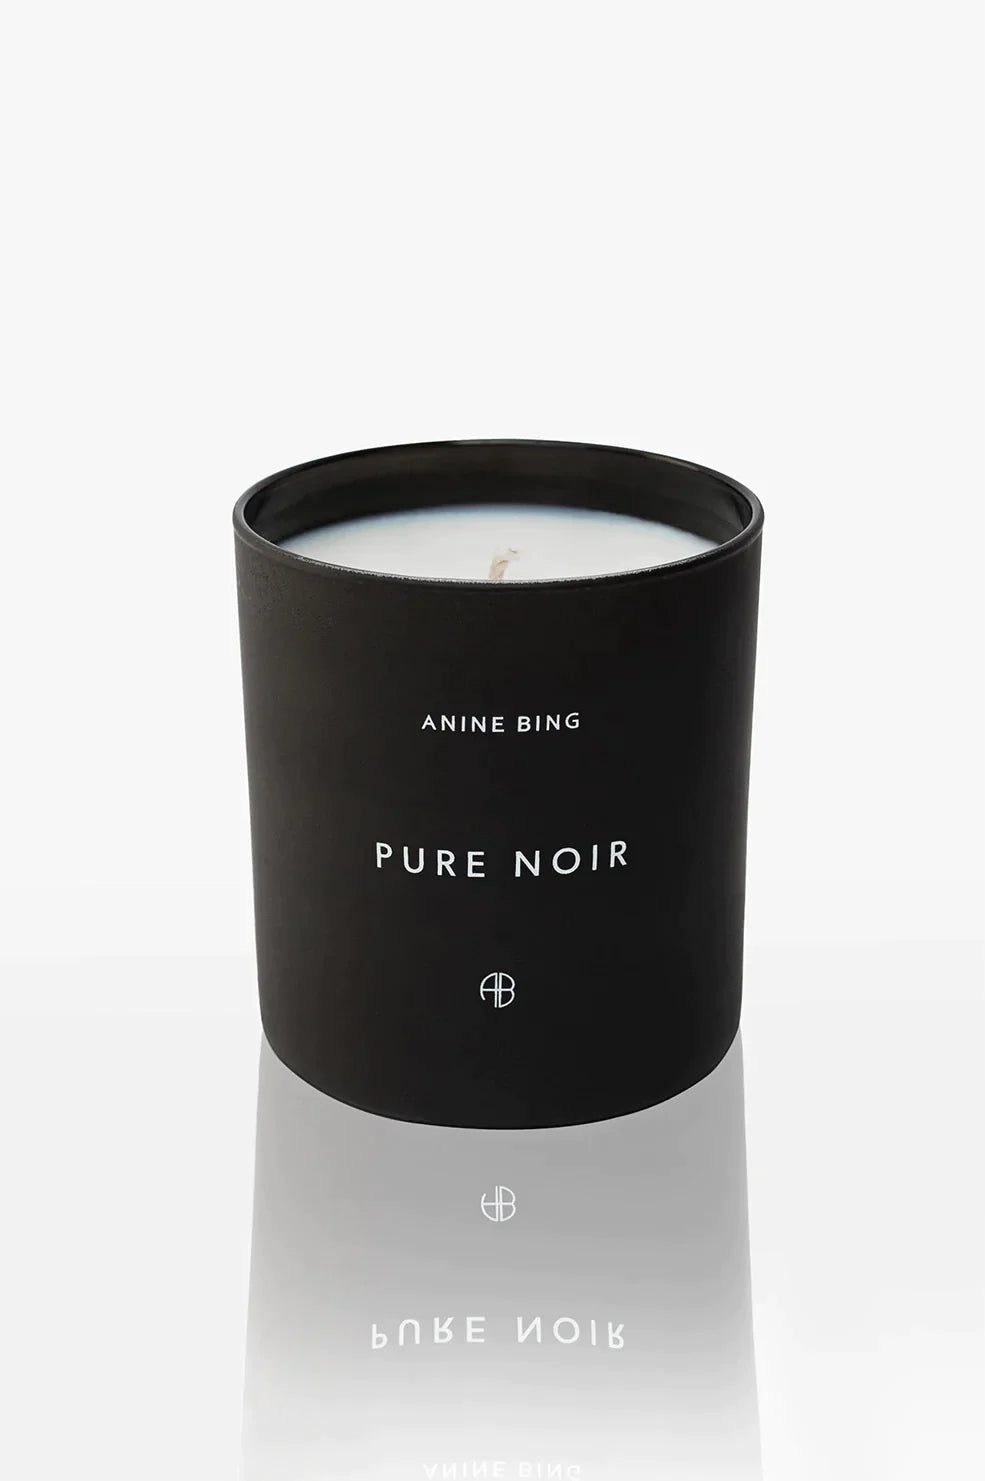 Anine Bing Pure Noir Candle.